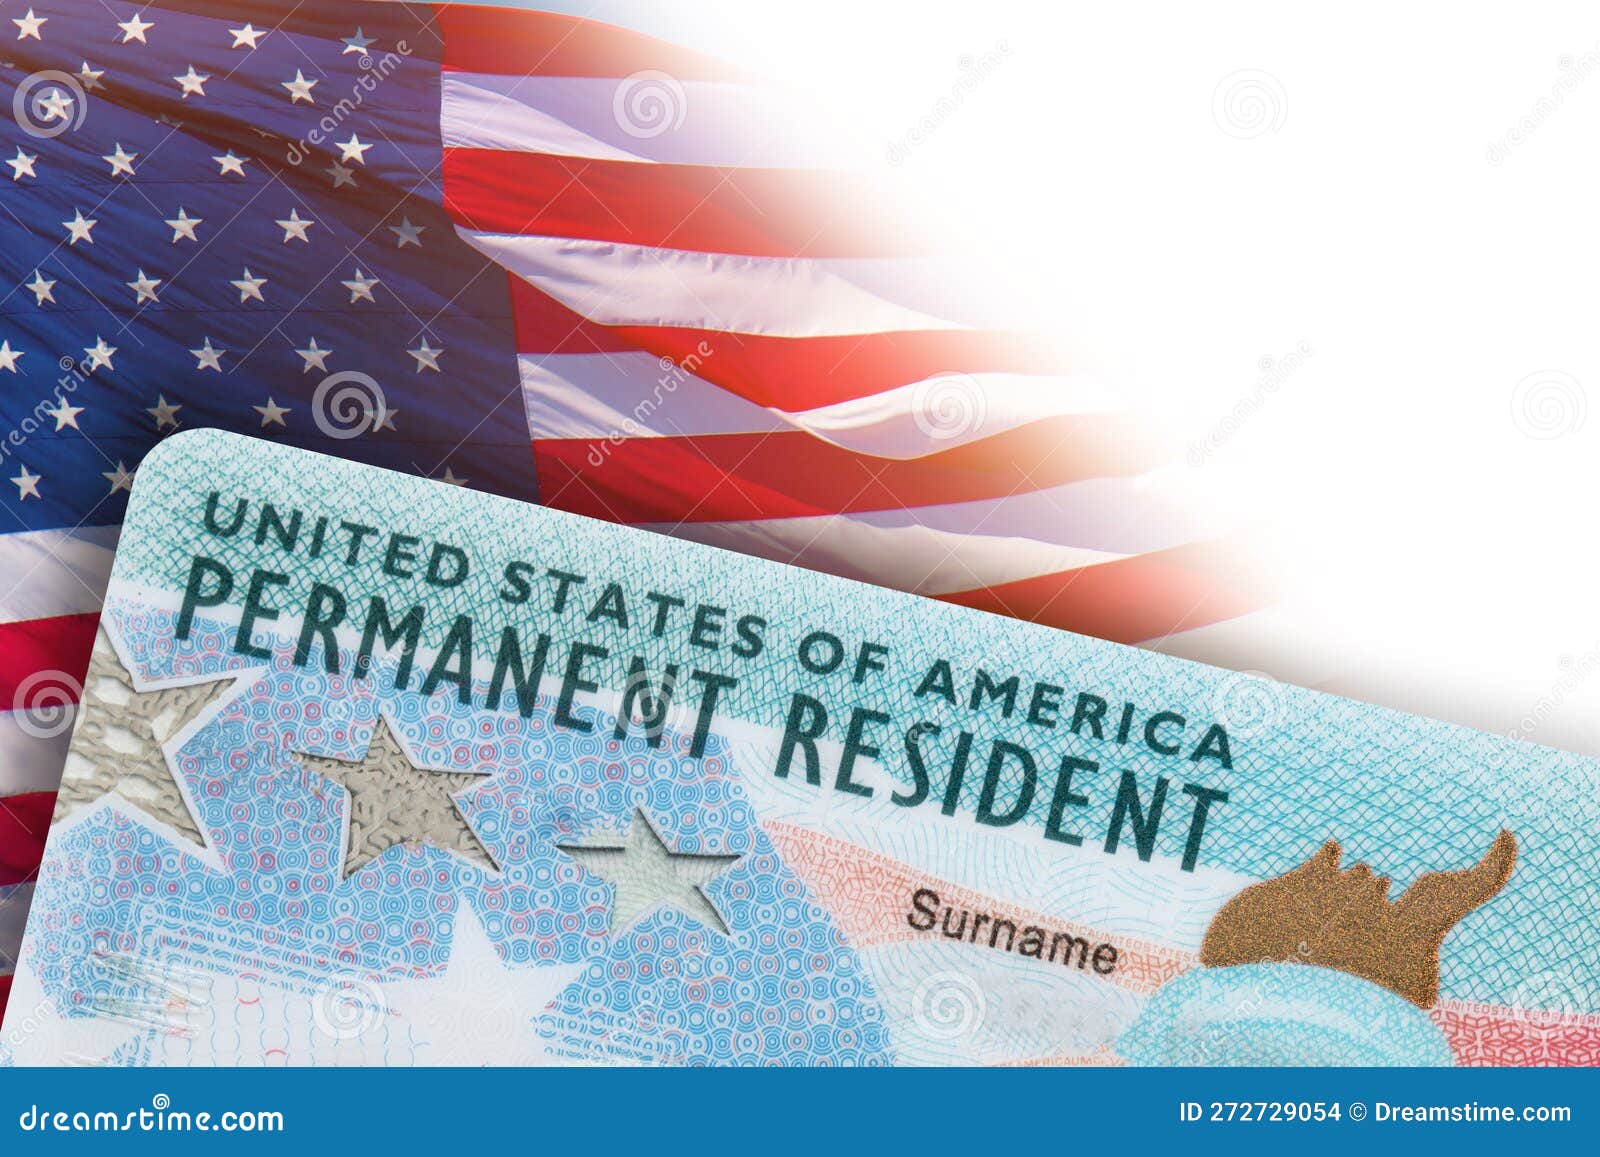 Green Card. US Permanent Resident Card. Immigration To USA. Electronic